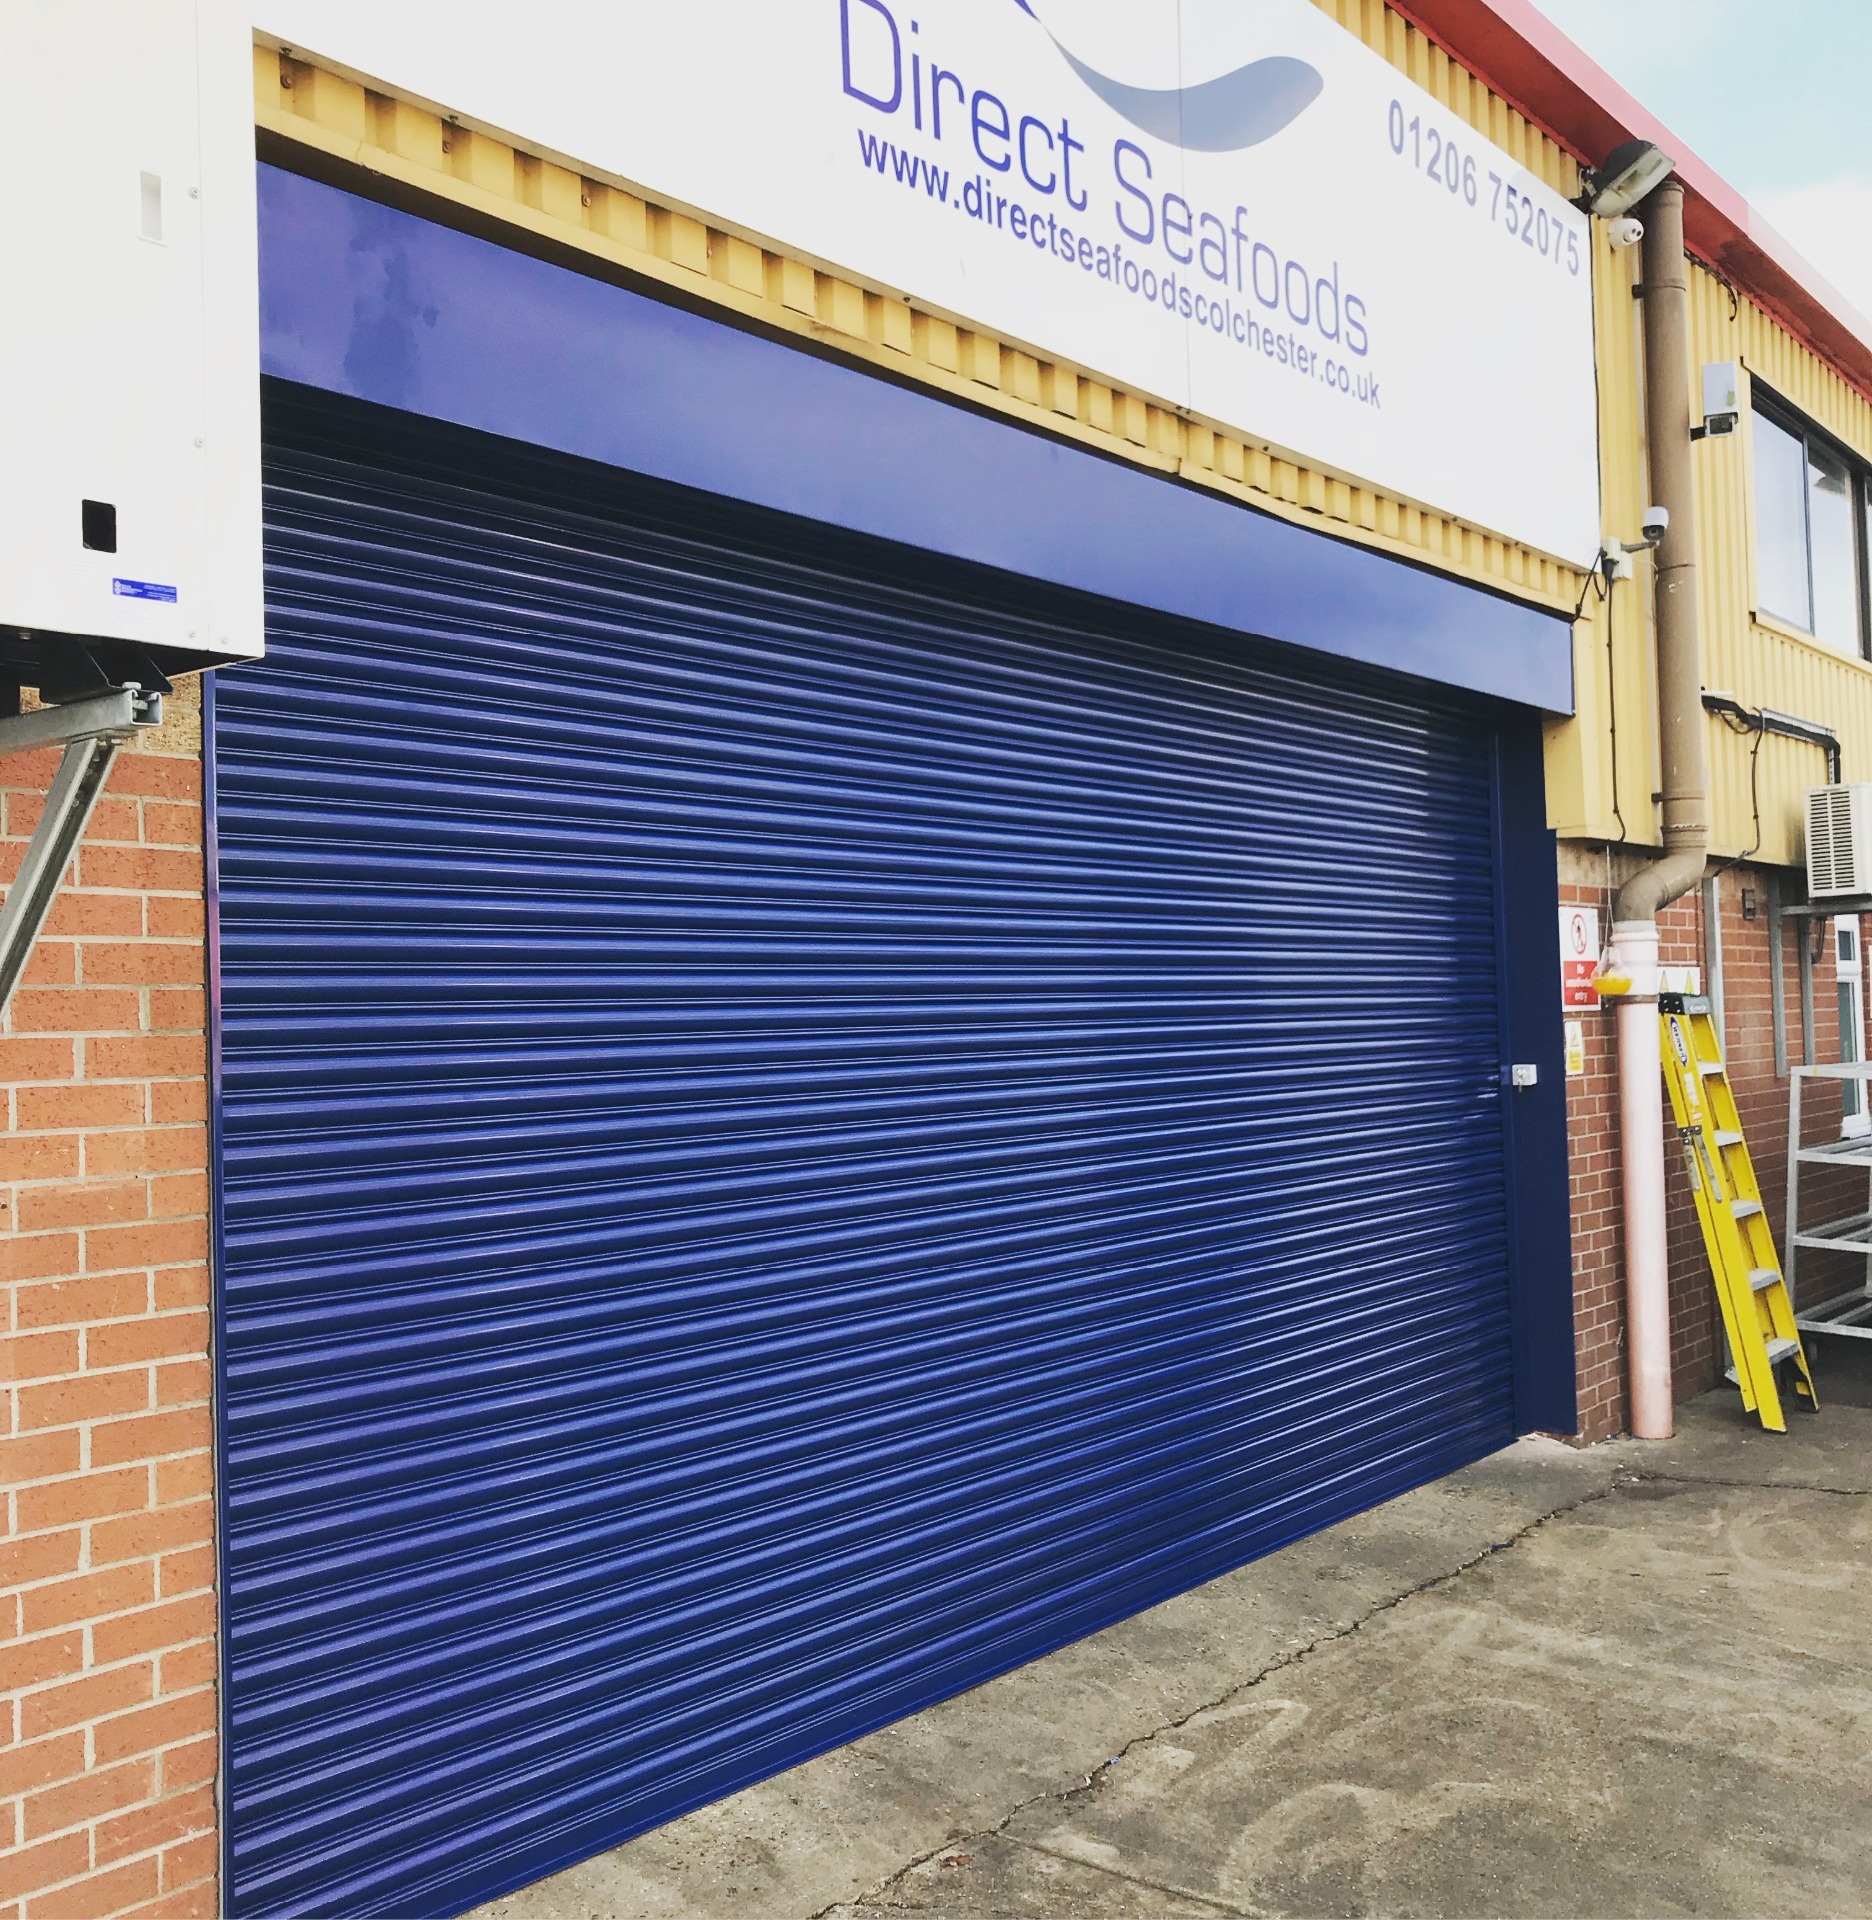 A new Roller shutter installed for Direct Seafoods in Colchester, Essex. We supplied and installed this roller shutter with a powder coated finish in Gentian Blue.